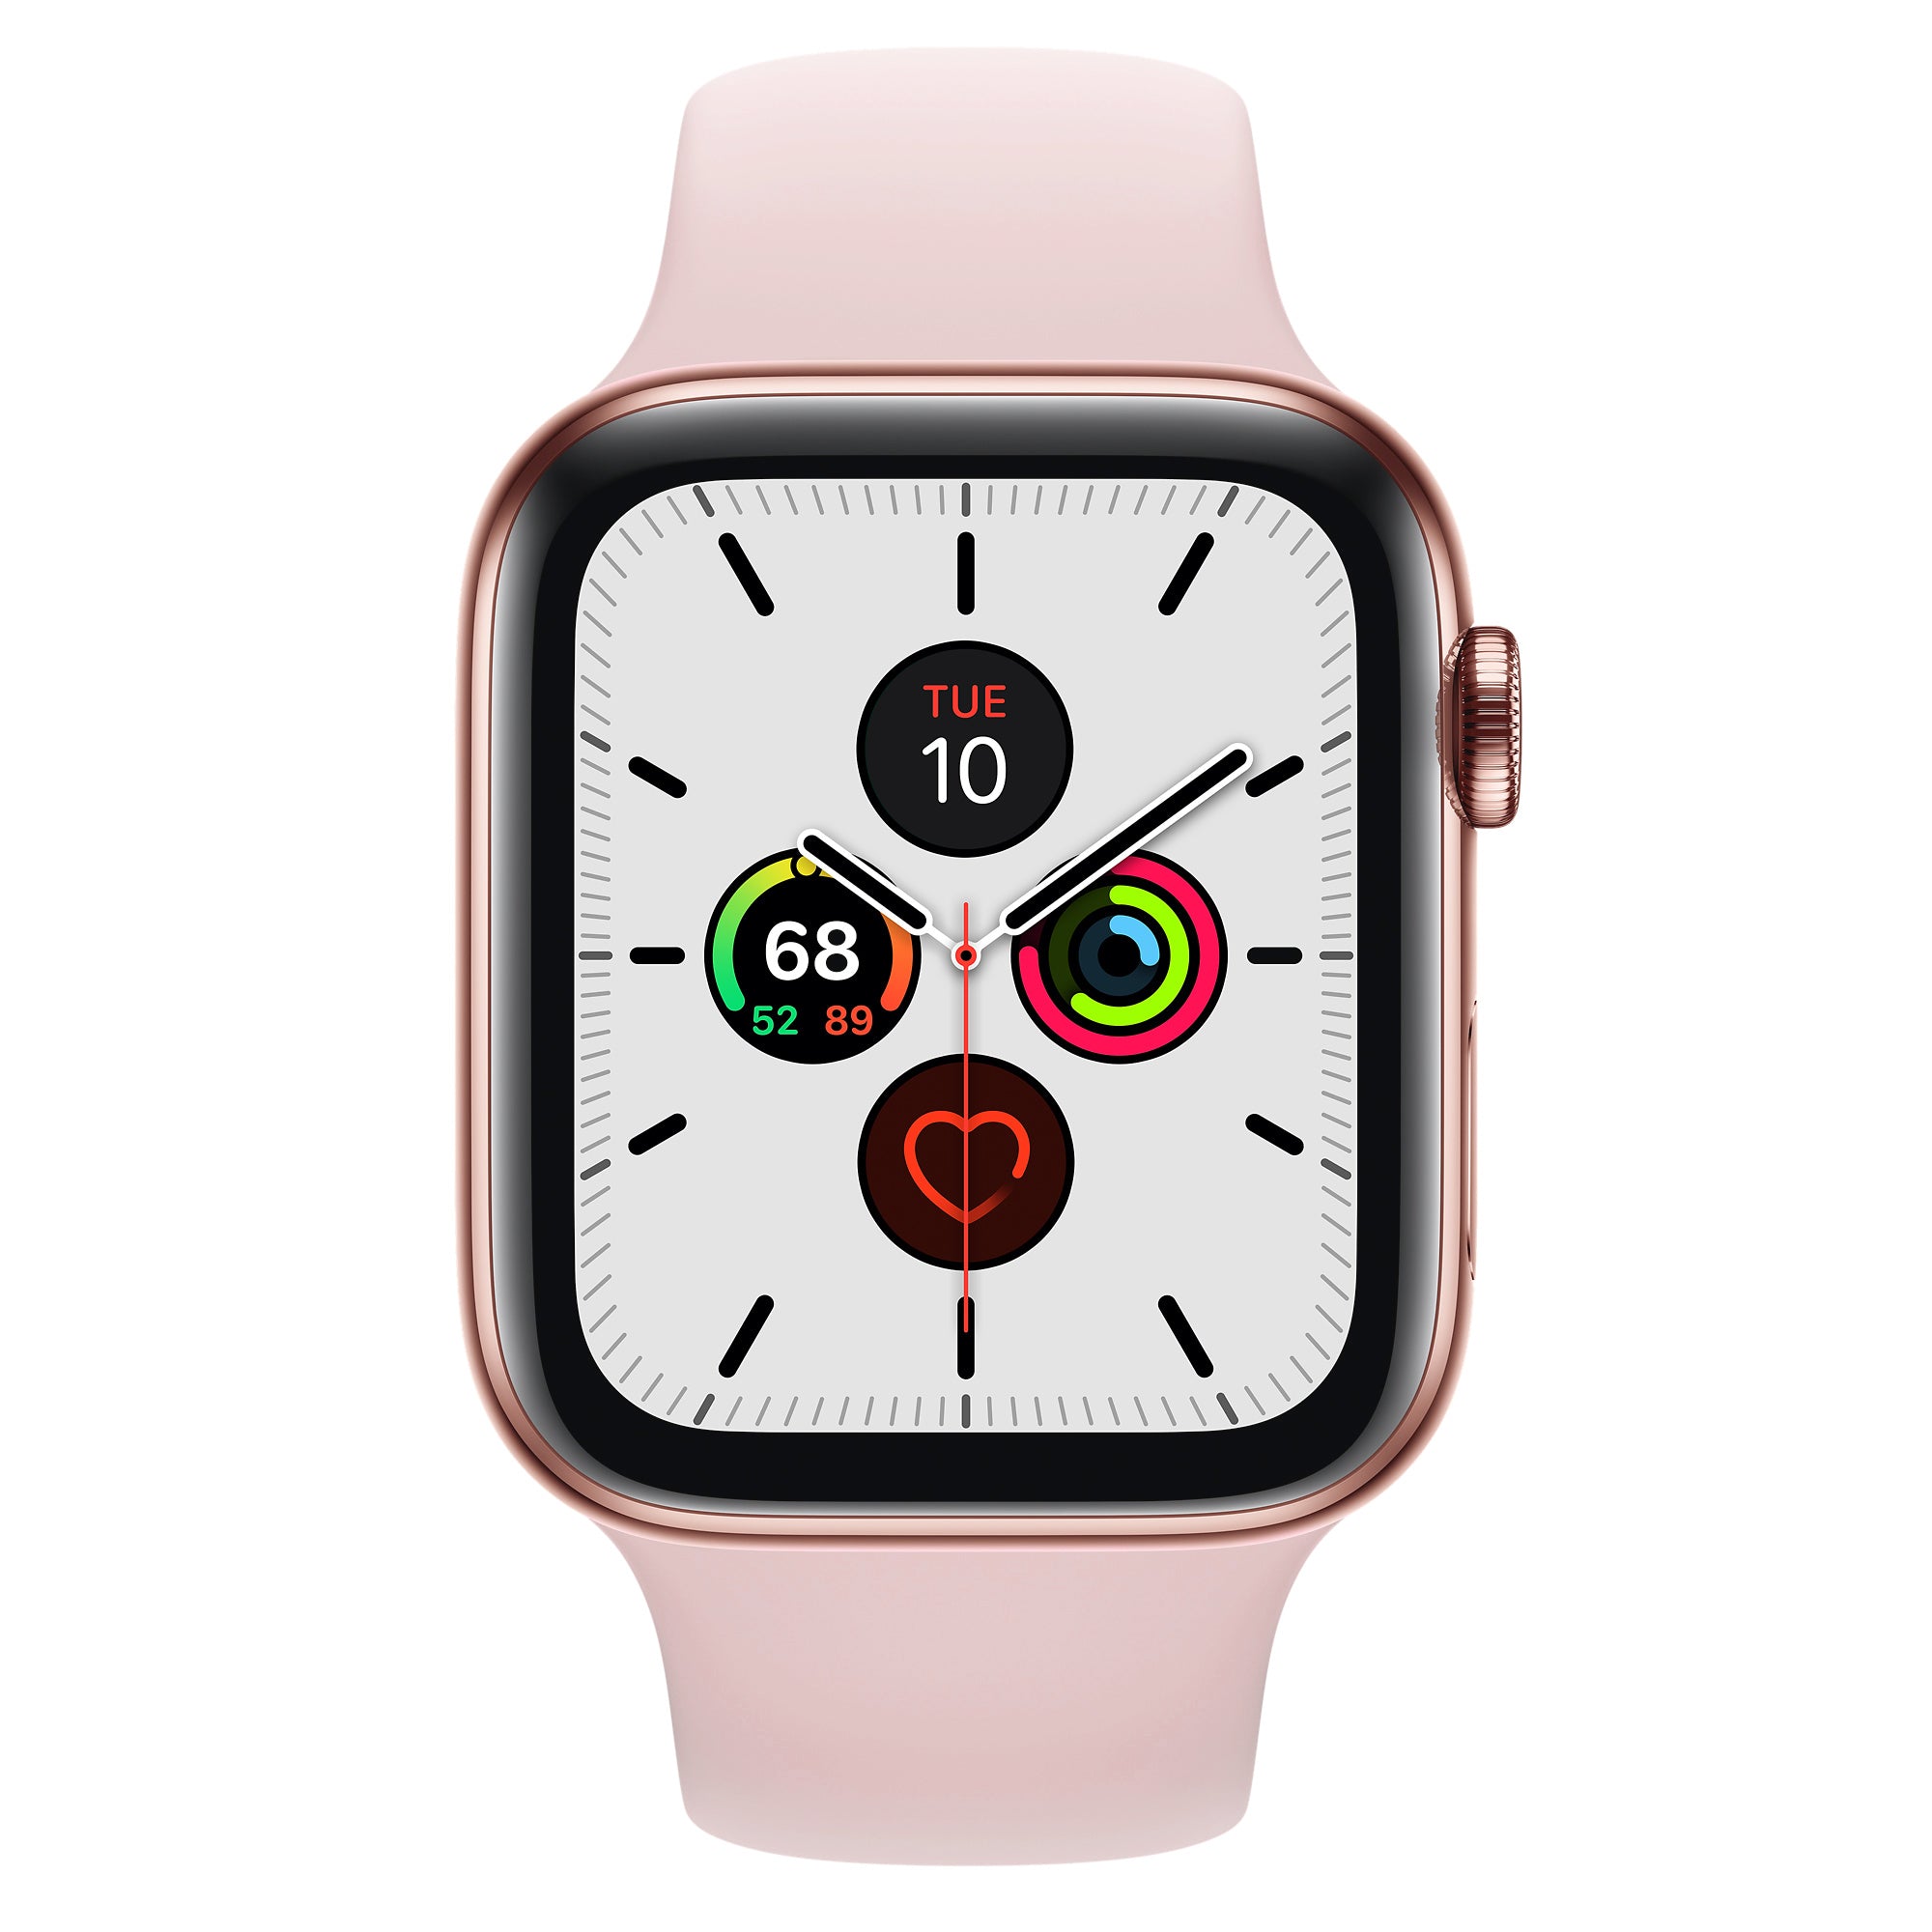 Buy Apple Watch Series 5 (GPS) - 44mm - Next Day Delivery